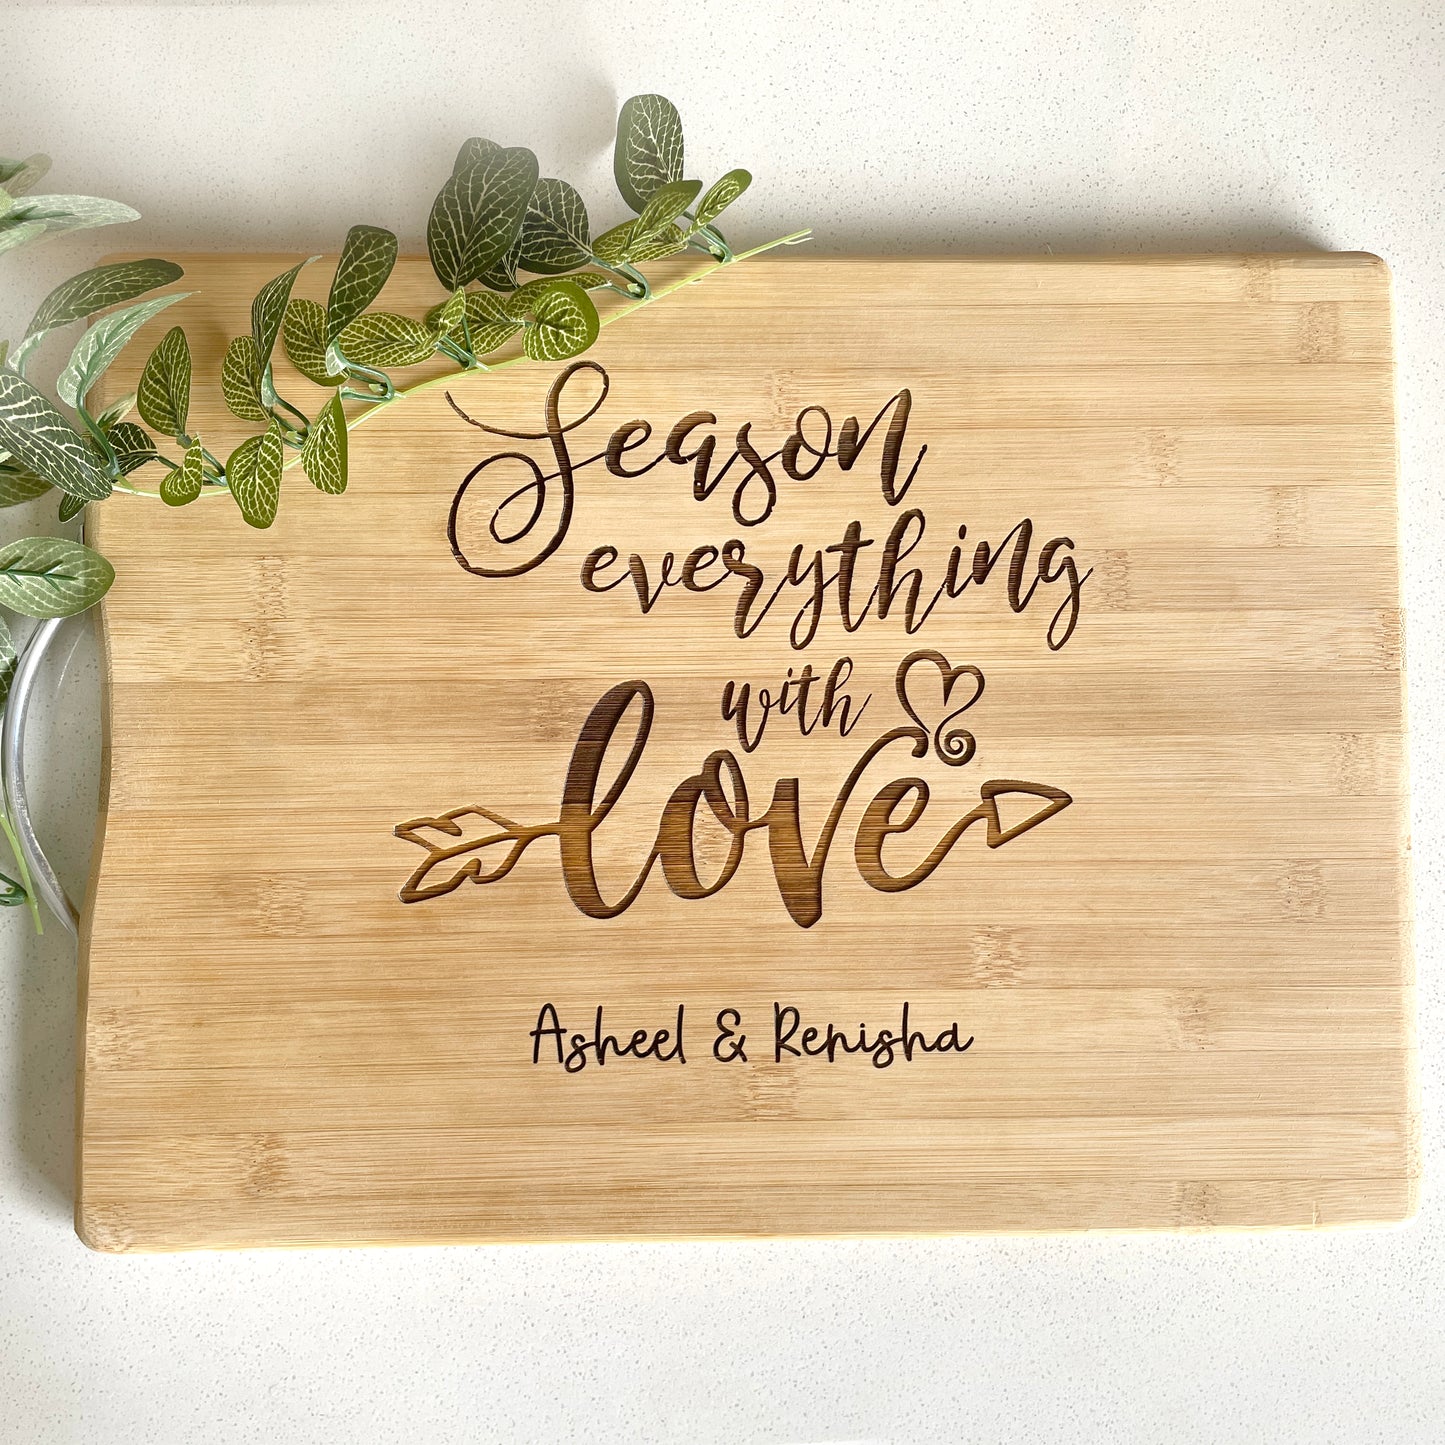 "SEASON EVERYTHING WITH LOVE" personalised engraved cutting board